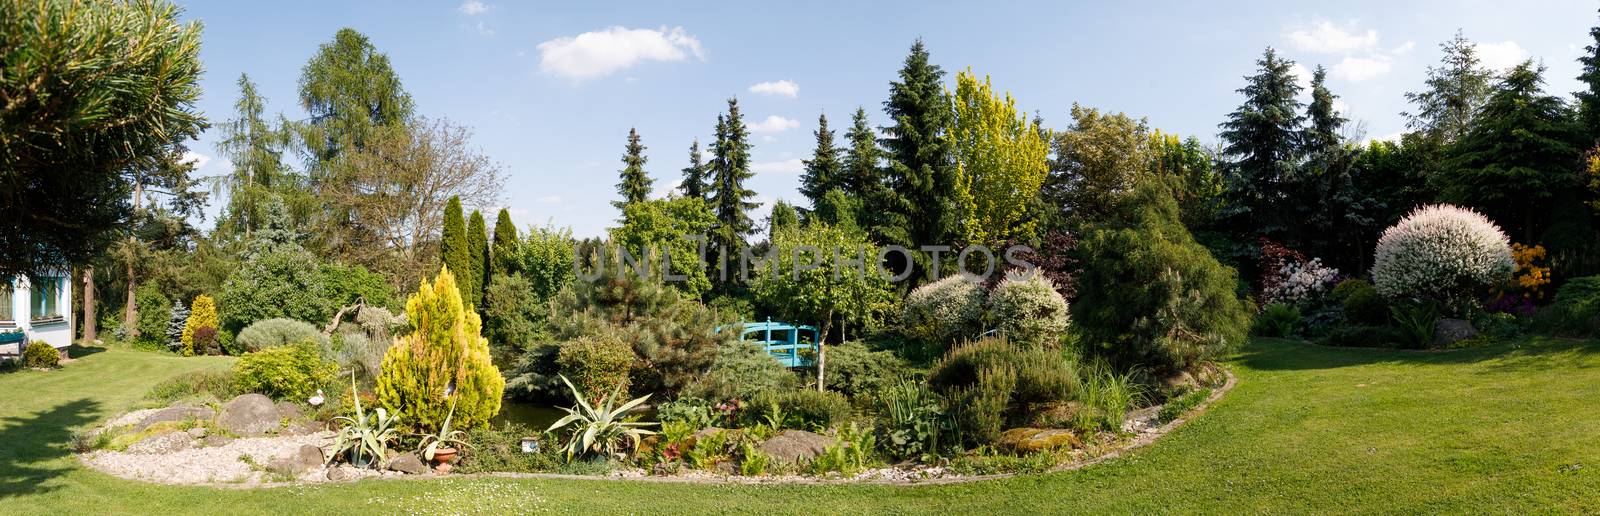 Colorful spring garden in evening sunlight. Spring gardening concept. Evergreen plant and tree.